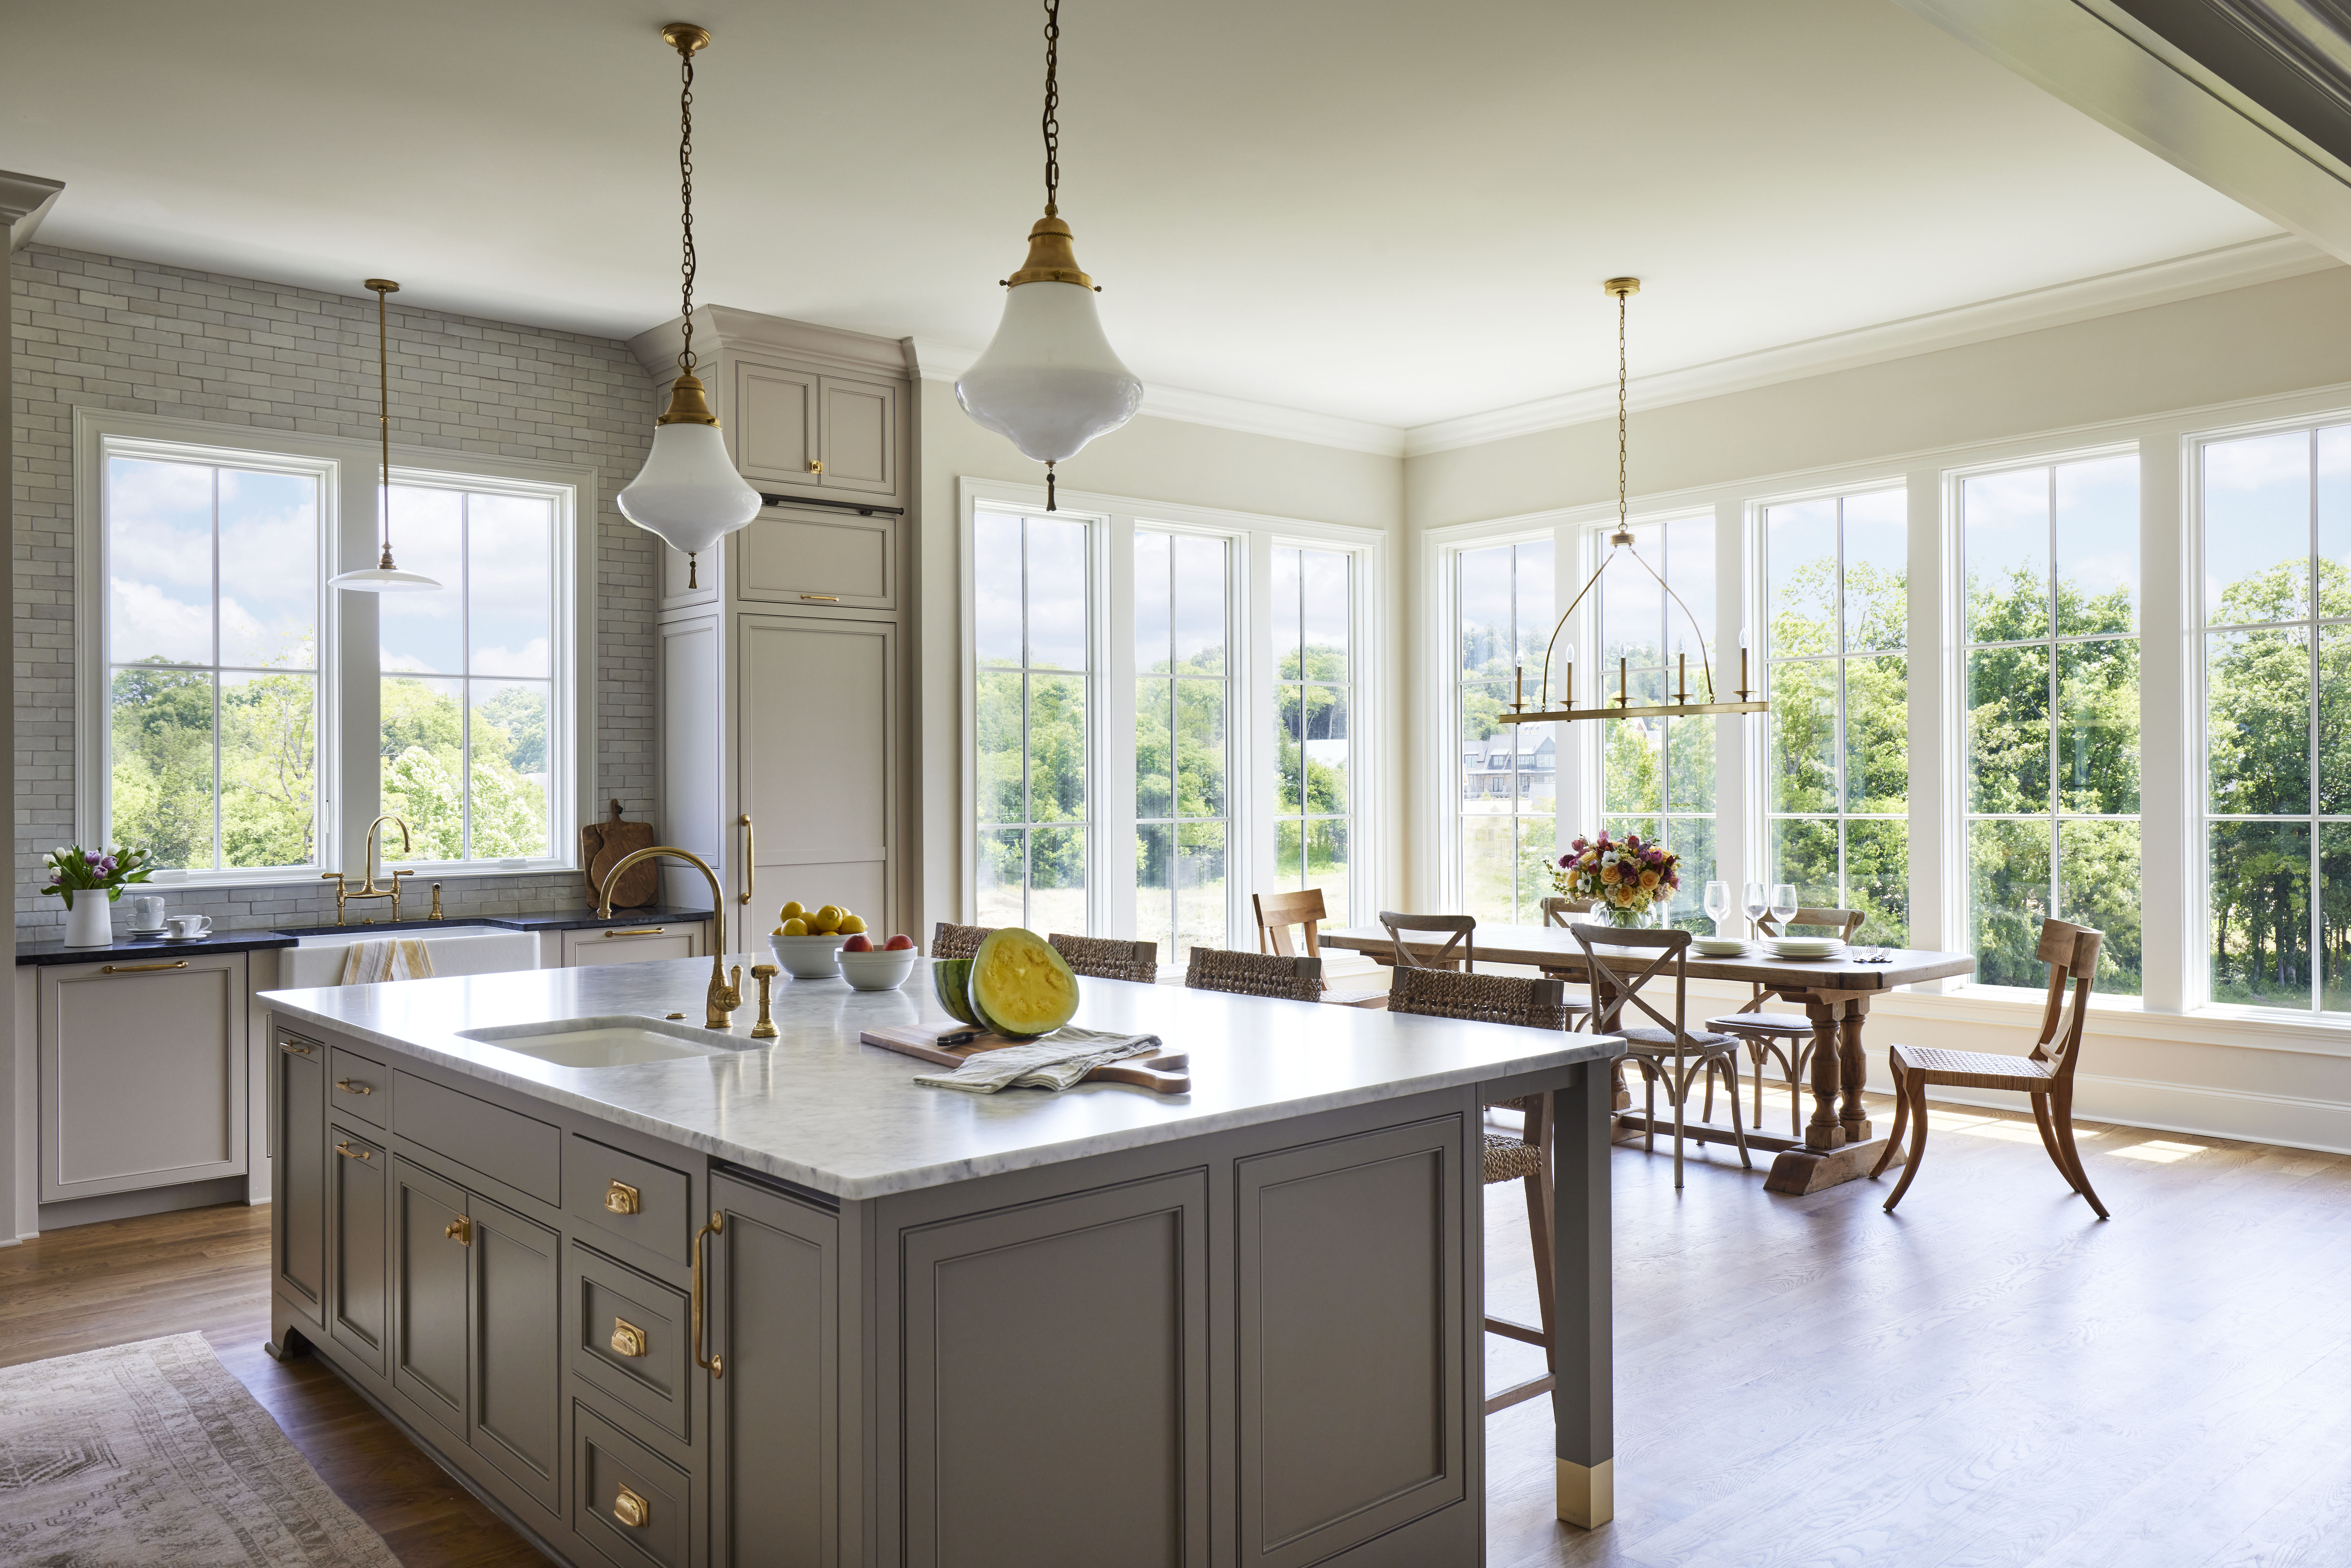 5 Ways Casement Windows Can Make a Long-Lasting Impact on Your Home